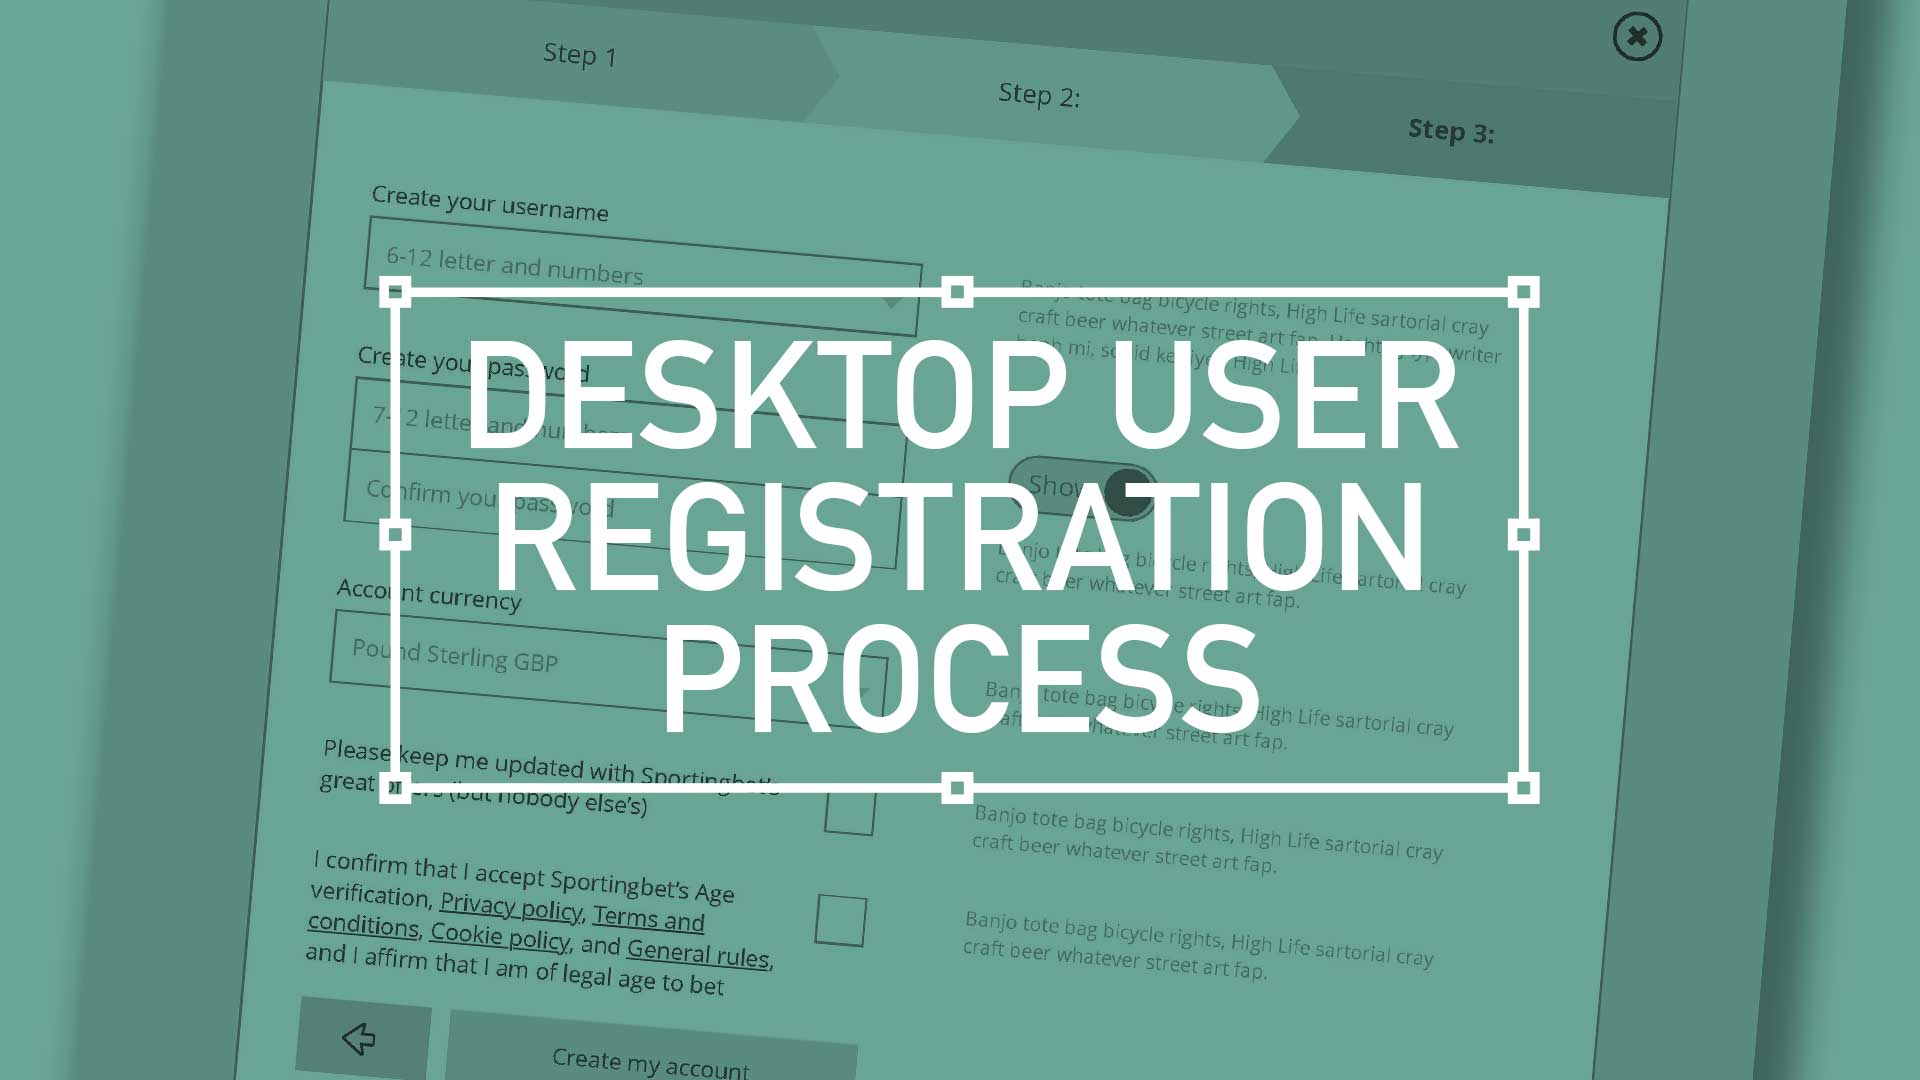 Ask the right questions when requesting personal information. Advocate a staged registration process, comparing it to dating, and encourages keeping the registration form simple. Additionally, highlighting the significance of minimising the drop-off rate during the registration process and incorporating fun elements into the user experience.